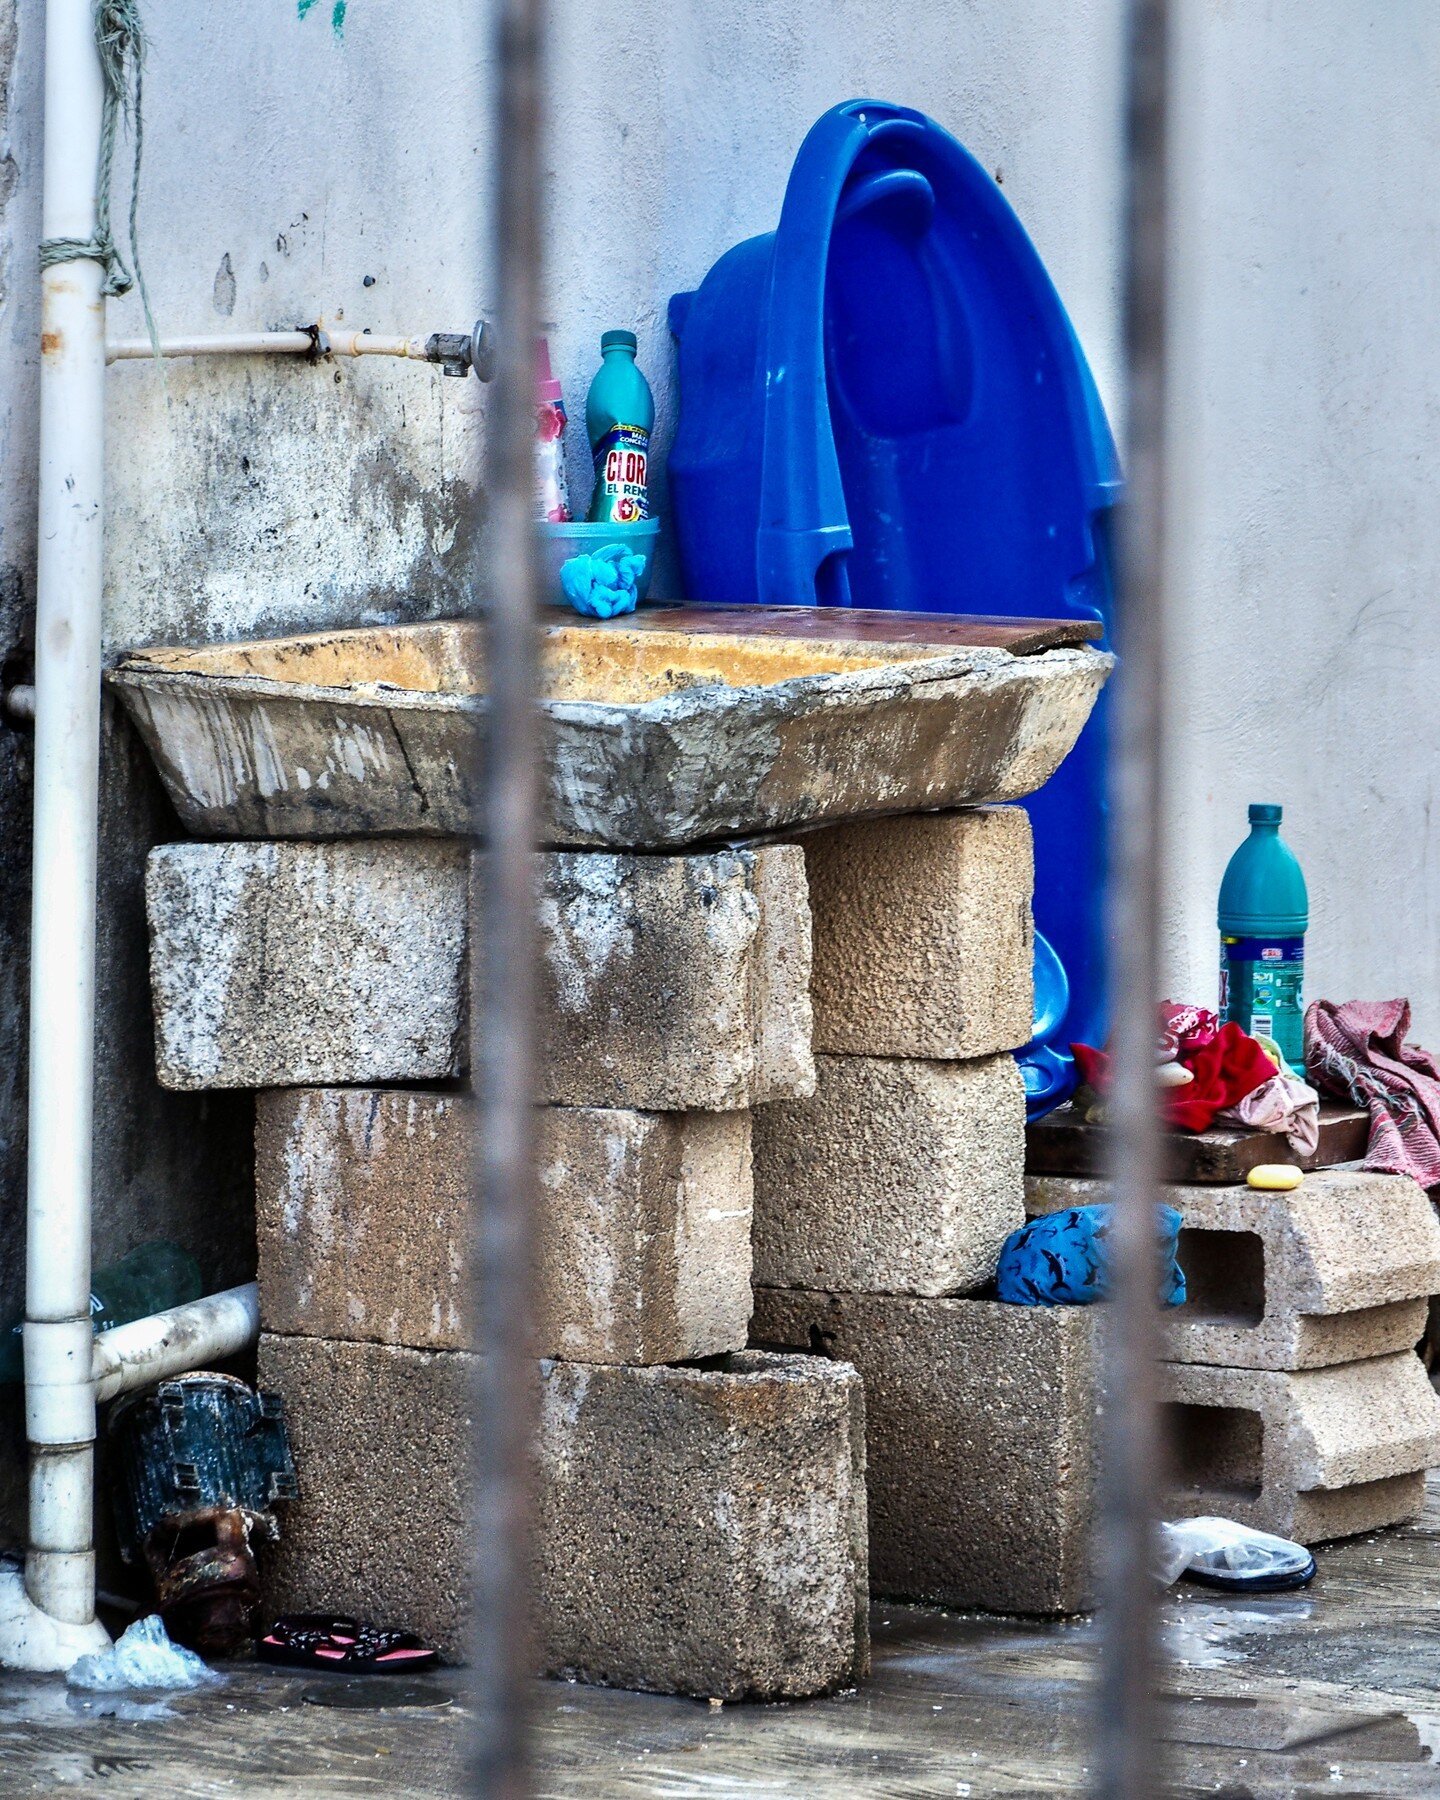 𝗧𝗛𝗘 𝗦𝗧𝗢𝗥𝗬 𝗢𝗙 ...
𝗪𝗵𝗶𝗹𝗲 𝗜 𝘄𝗮𝘀 𝗶𝗻 ... 🇲🇽
🍥 Playa del Carmen. A Greco-Roman style sink suddenly and unexpectedly appears behind the steel bars of the side entry gate.
The deep blue colour adds dimension to the whole scene. 
*
🇲?